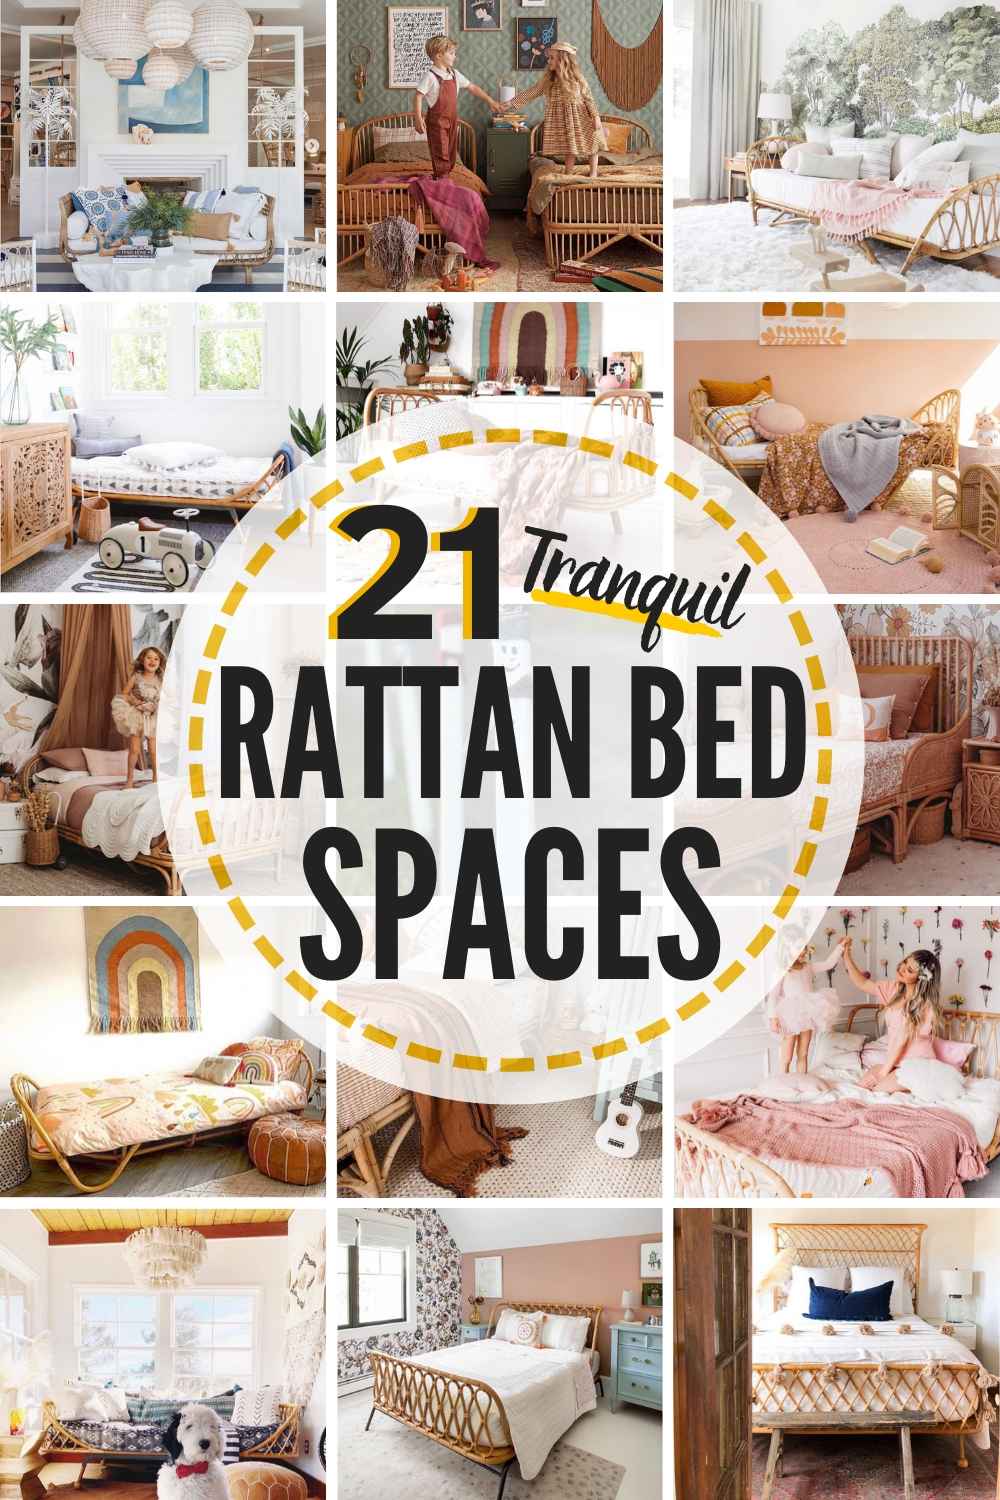 8 Stunning Rattan Beds & Daybeds To Buy + 21 Real Spaces That Use Them!